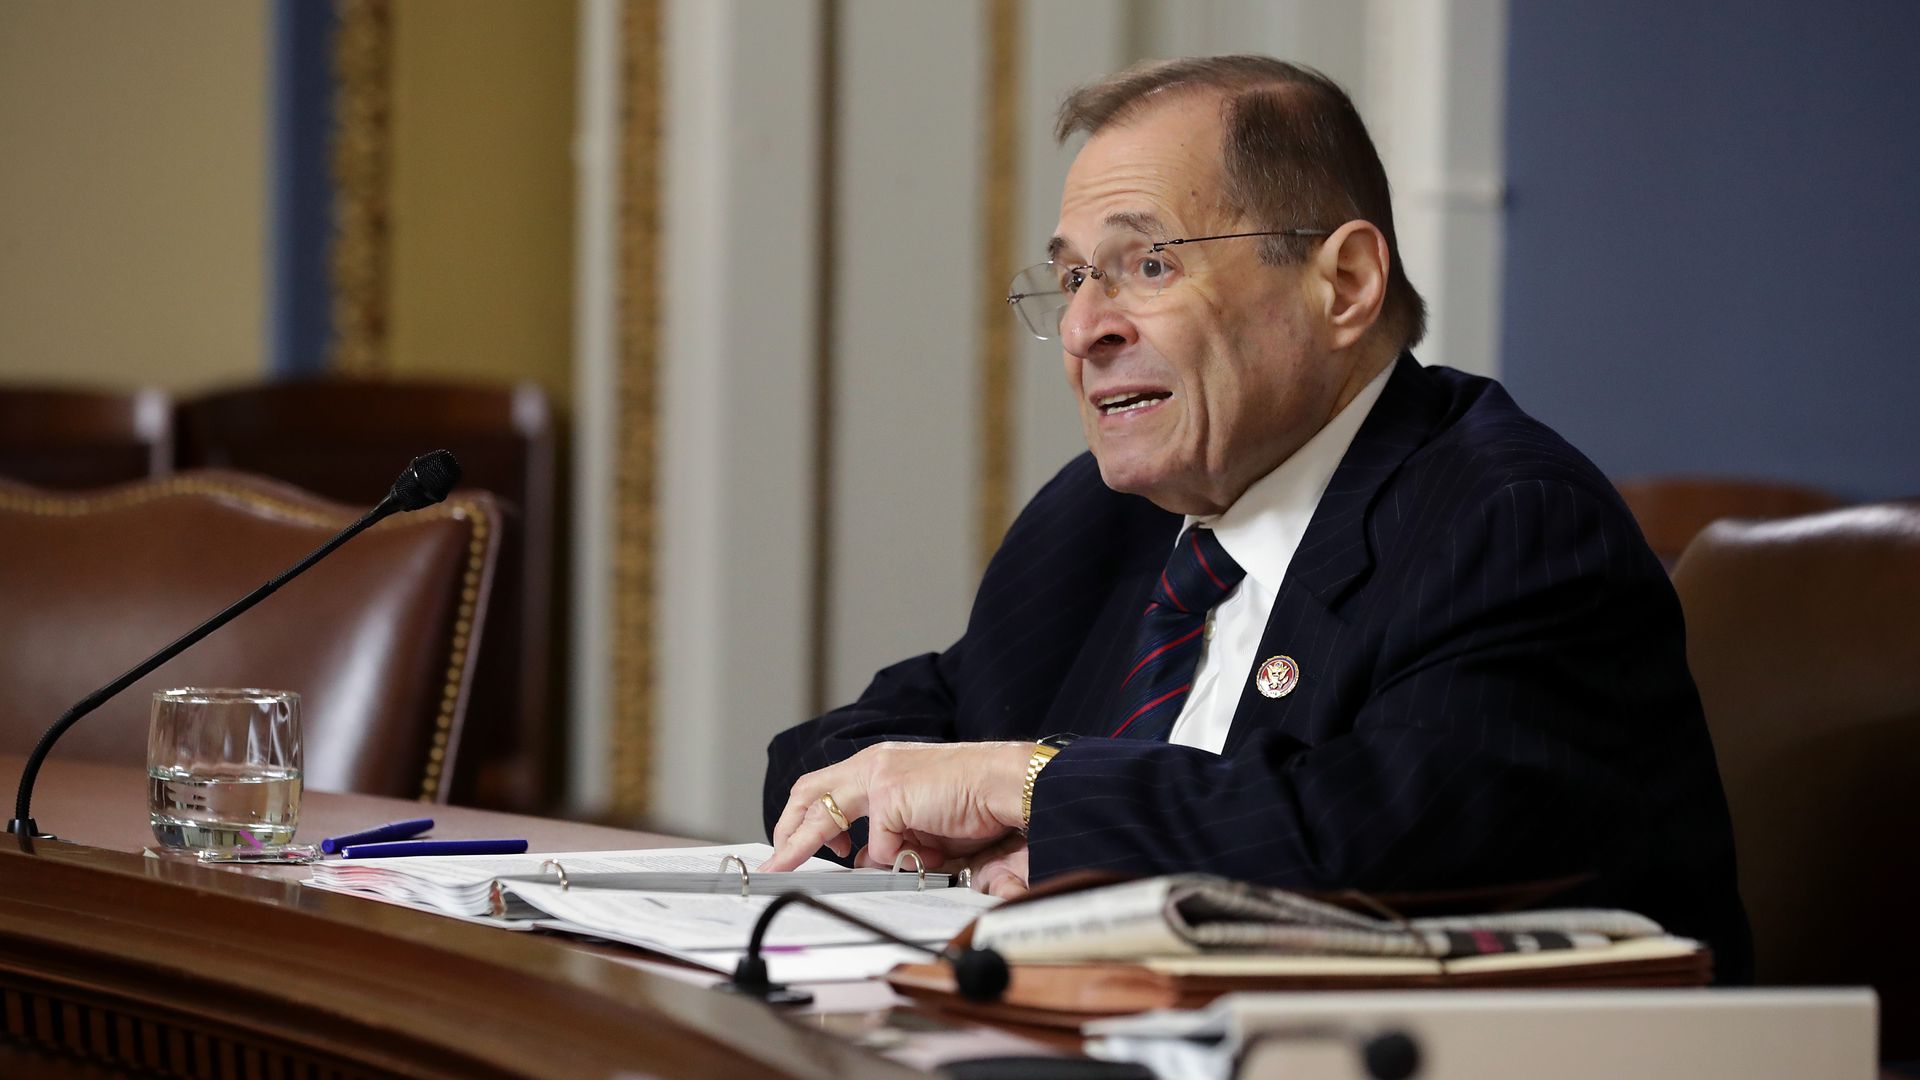  House Judiciary Committee Chairman Jerry Nadler reads the Mueller Report in the Rules Committee hearing room at the U.S. Capitol May 16, 2019 in Washington, DC. 